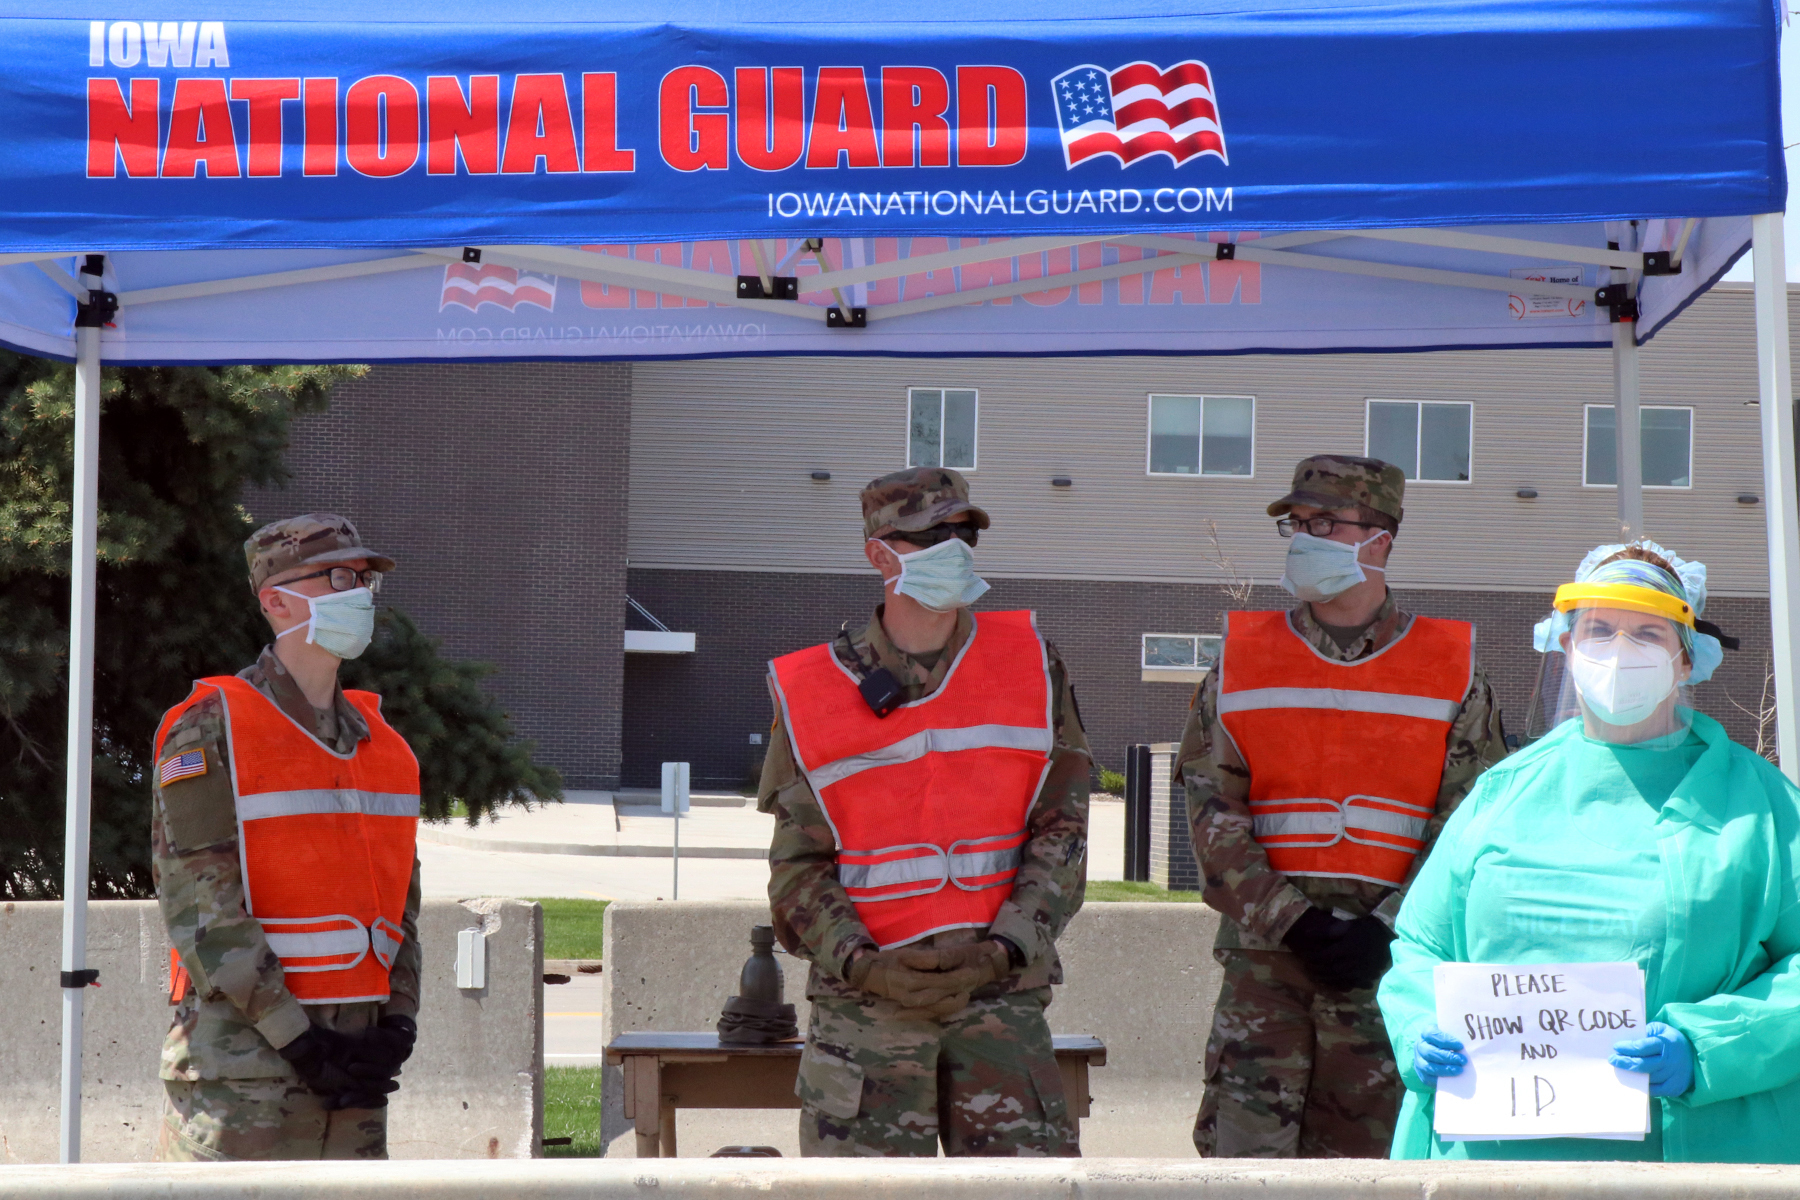 Iowa National Guard Soldiers of the 186th military police company and a local health care professional operate a traffic control point at the COVID-19 testing site at the Iowa Events Center in Des Moines, Iowa, on April 25, 2020. Photo by Cpl. Samantha Hircock